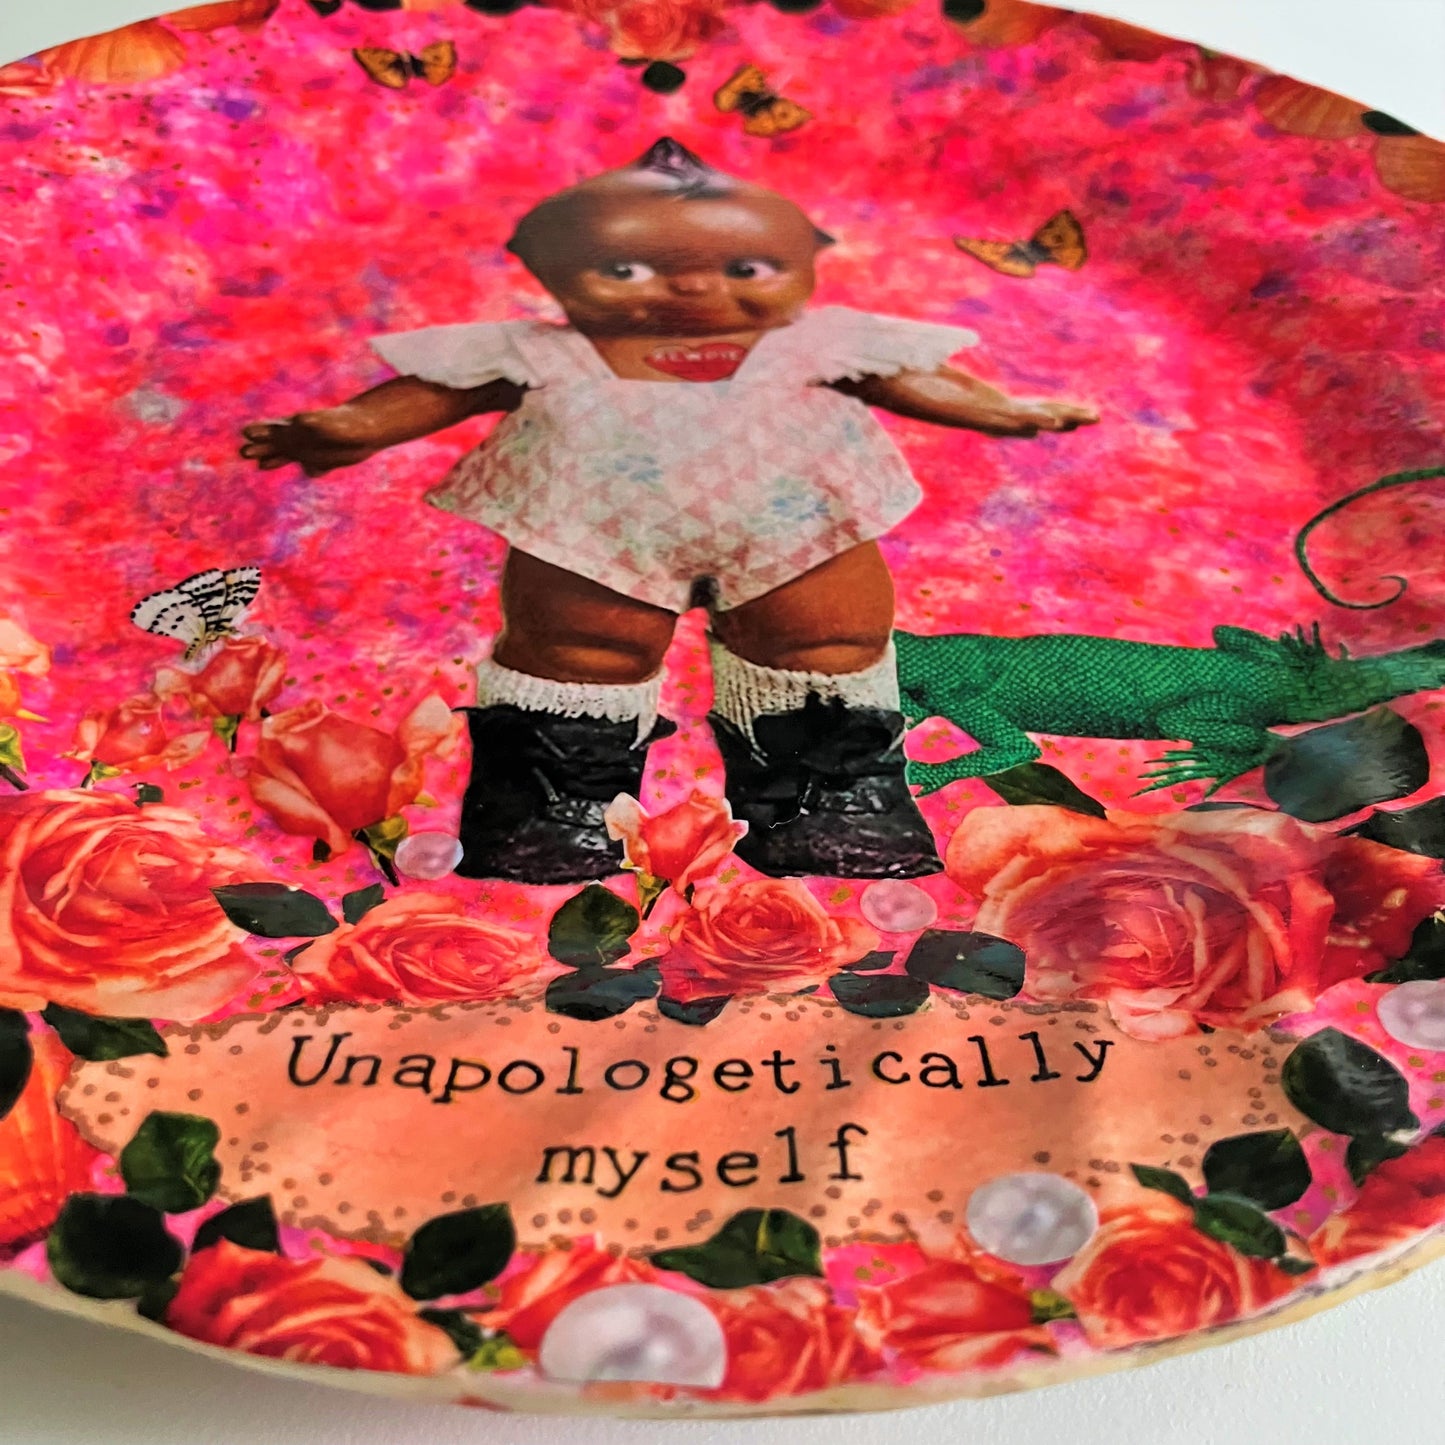 "Unapologetically Myself" Wall Plate by House of Frisson, featuring a vintage black doll surrounded by roses , pearls, moths, and a lizard, framed by shells, on a pink background. Showing closeup details of the roses and pearls.